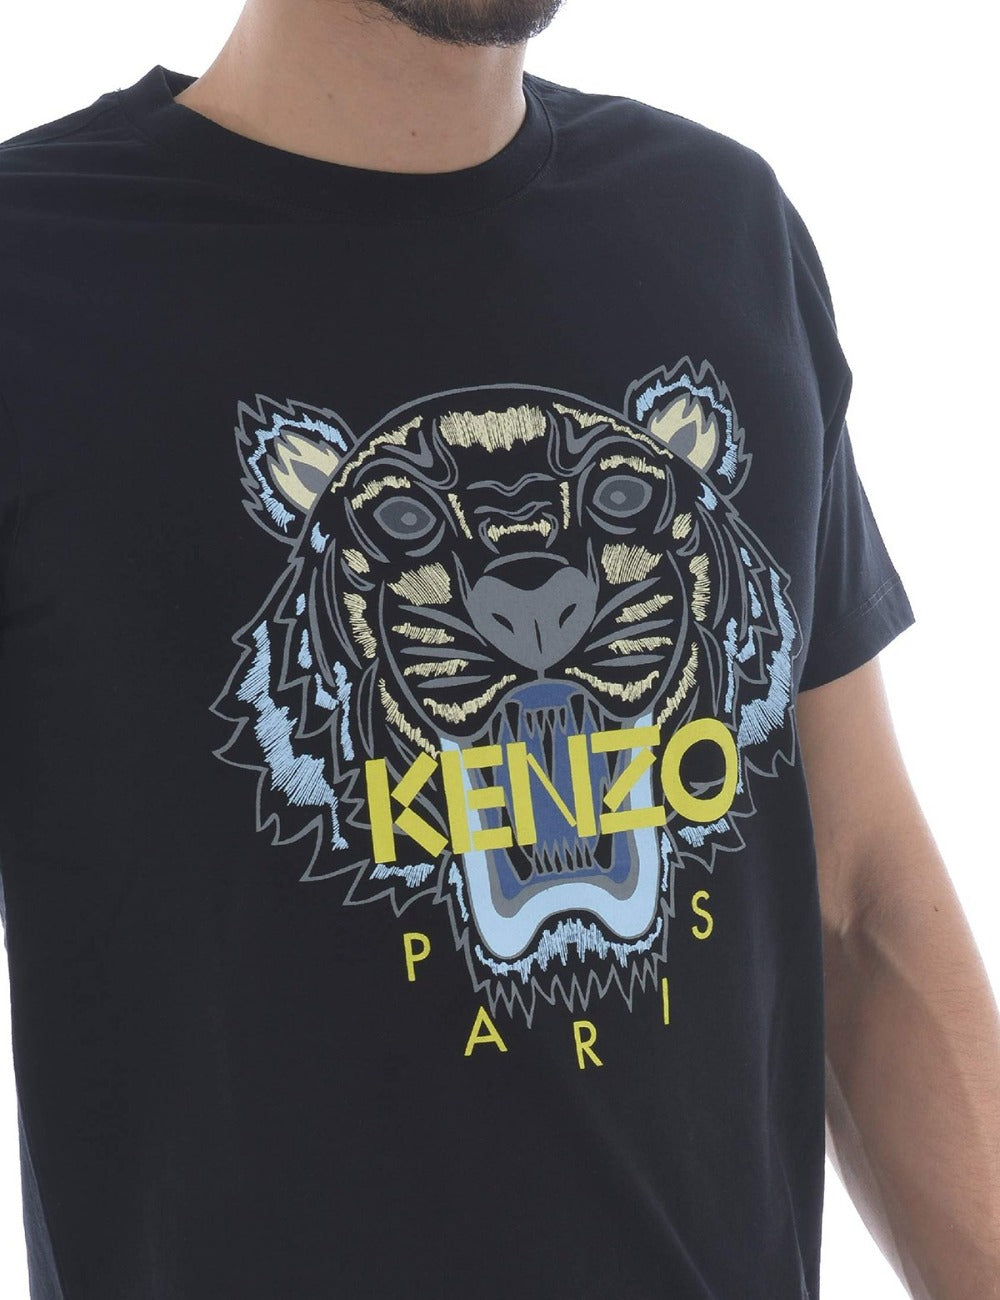 Kenzo Blue Yellow Tiger Logo T-Shirt - Shop Streetwear, Sneakers, Slippers and Gifts online | Malaysia - The Factory KL